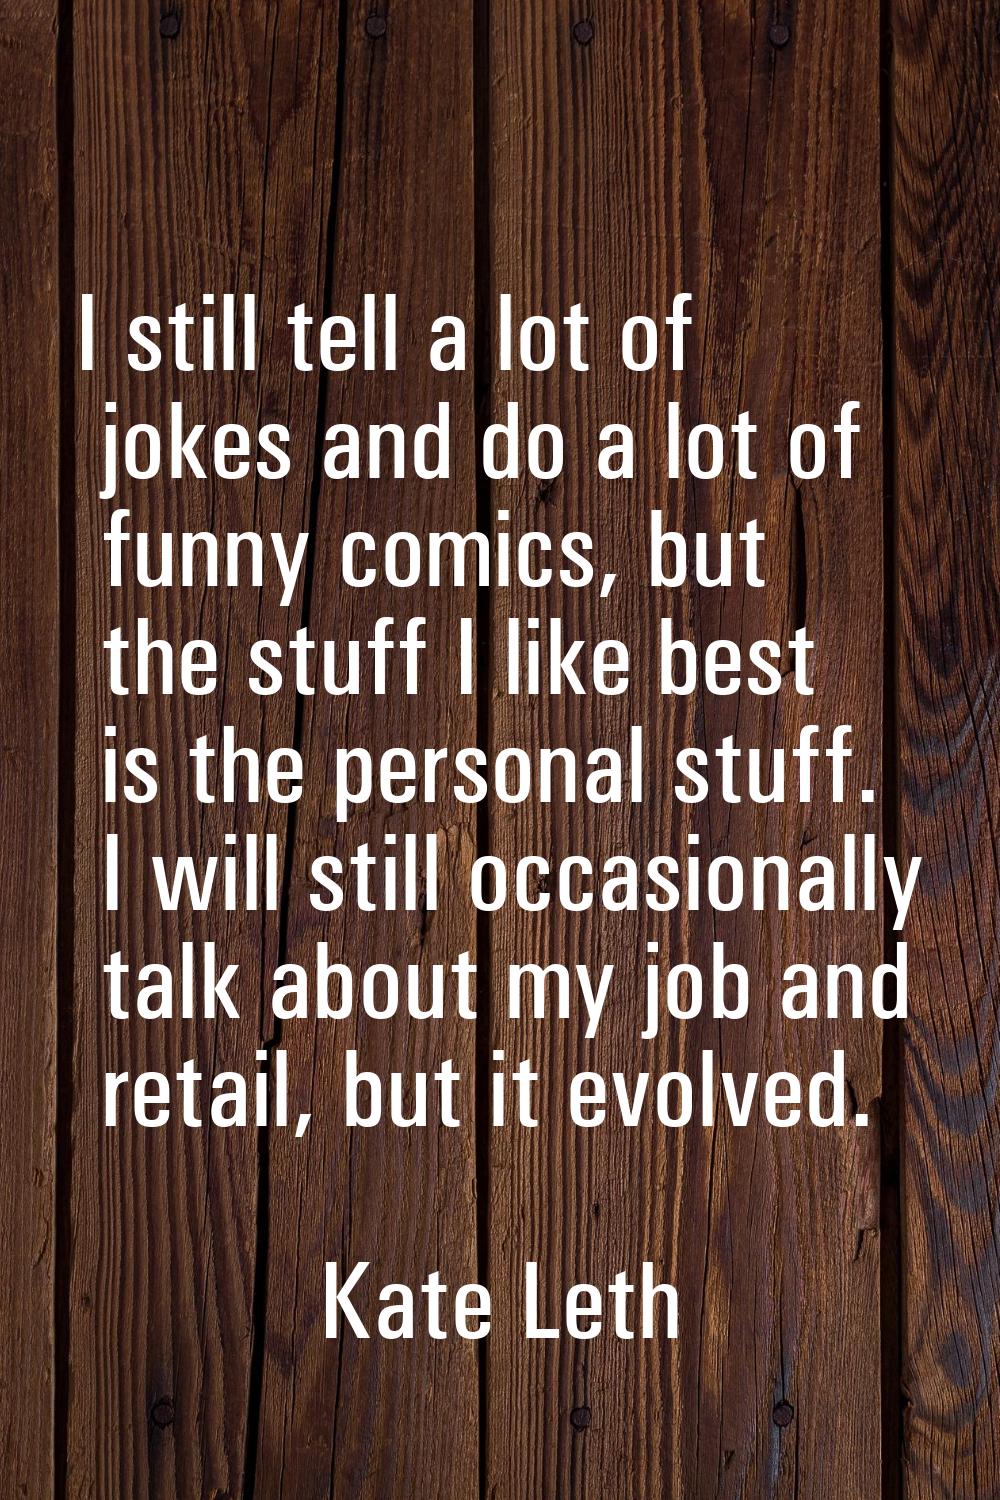 I still tell a lot of jokes and do a lot of funny comics, but the stuff I like best is the personal